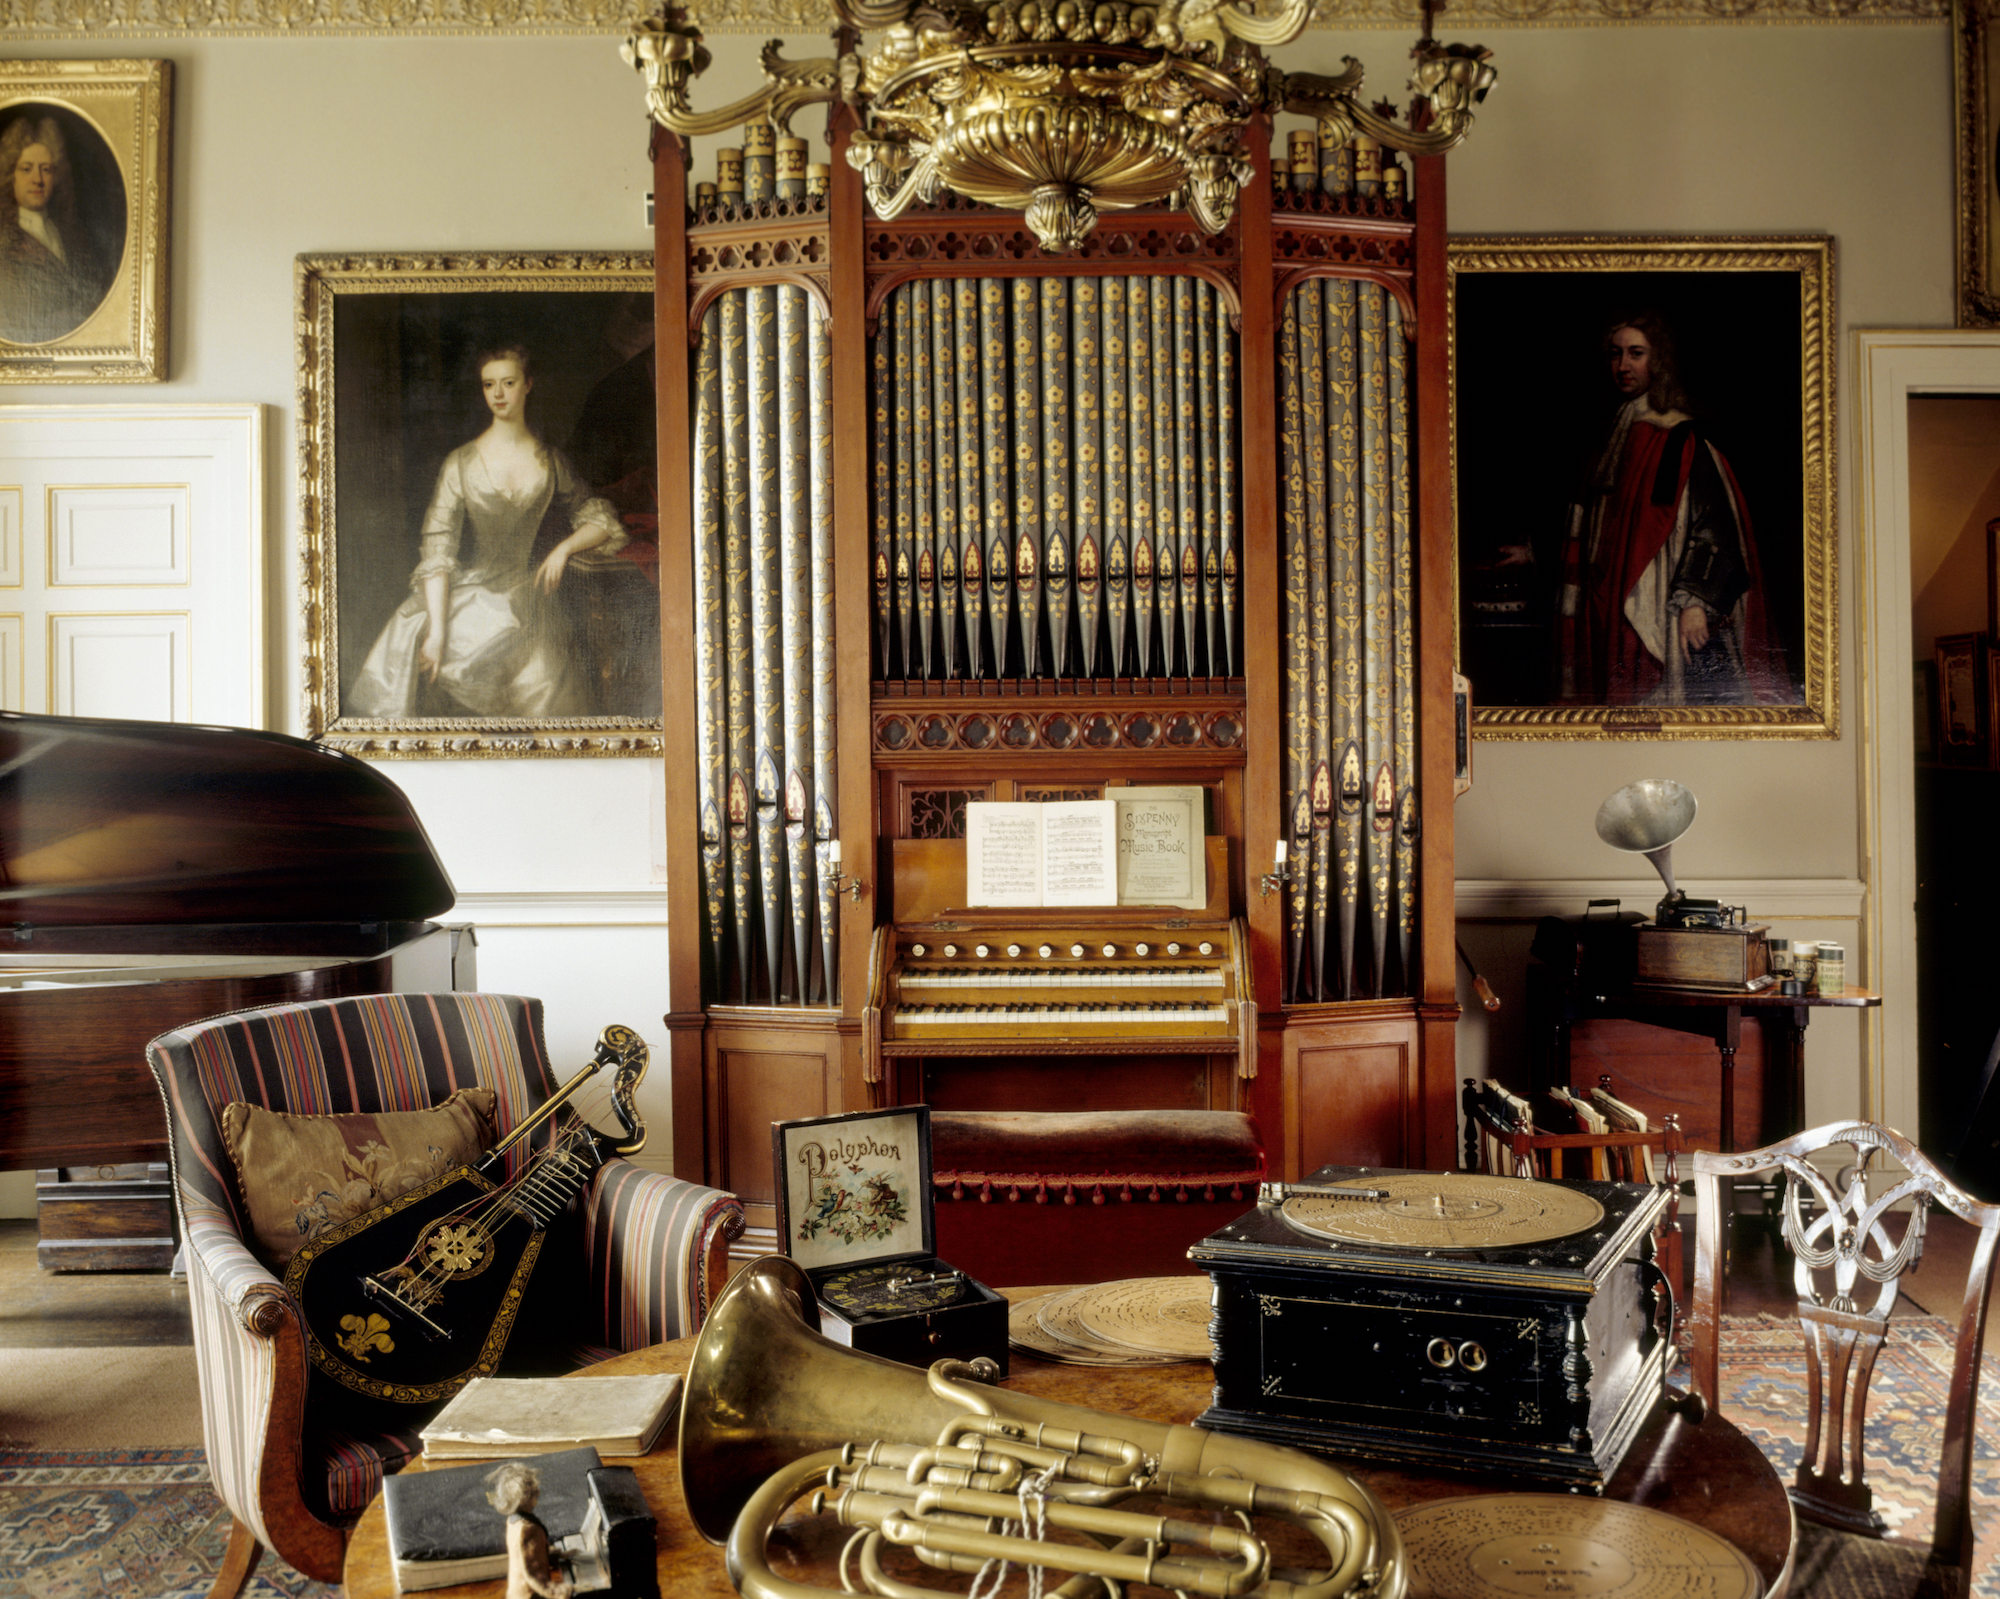 The Music Room at Erddig, with harp-lute to left